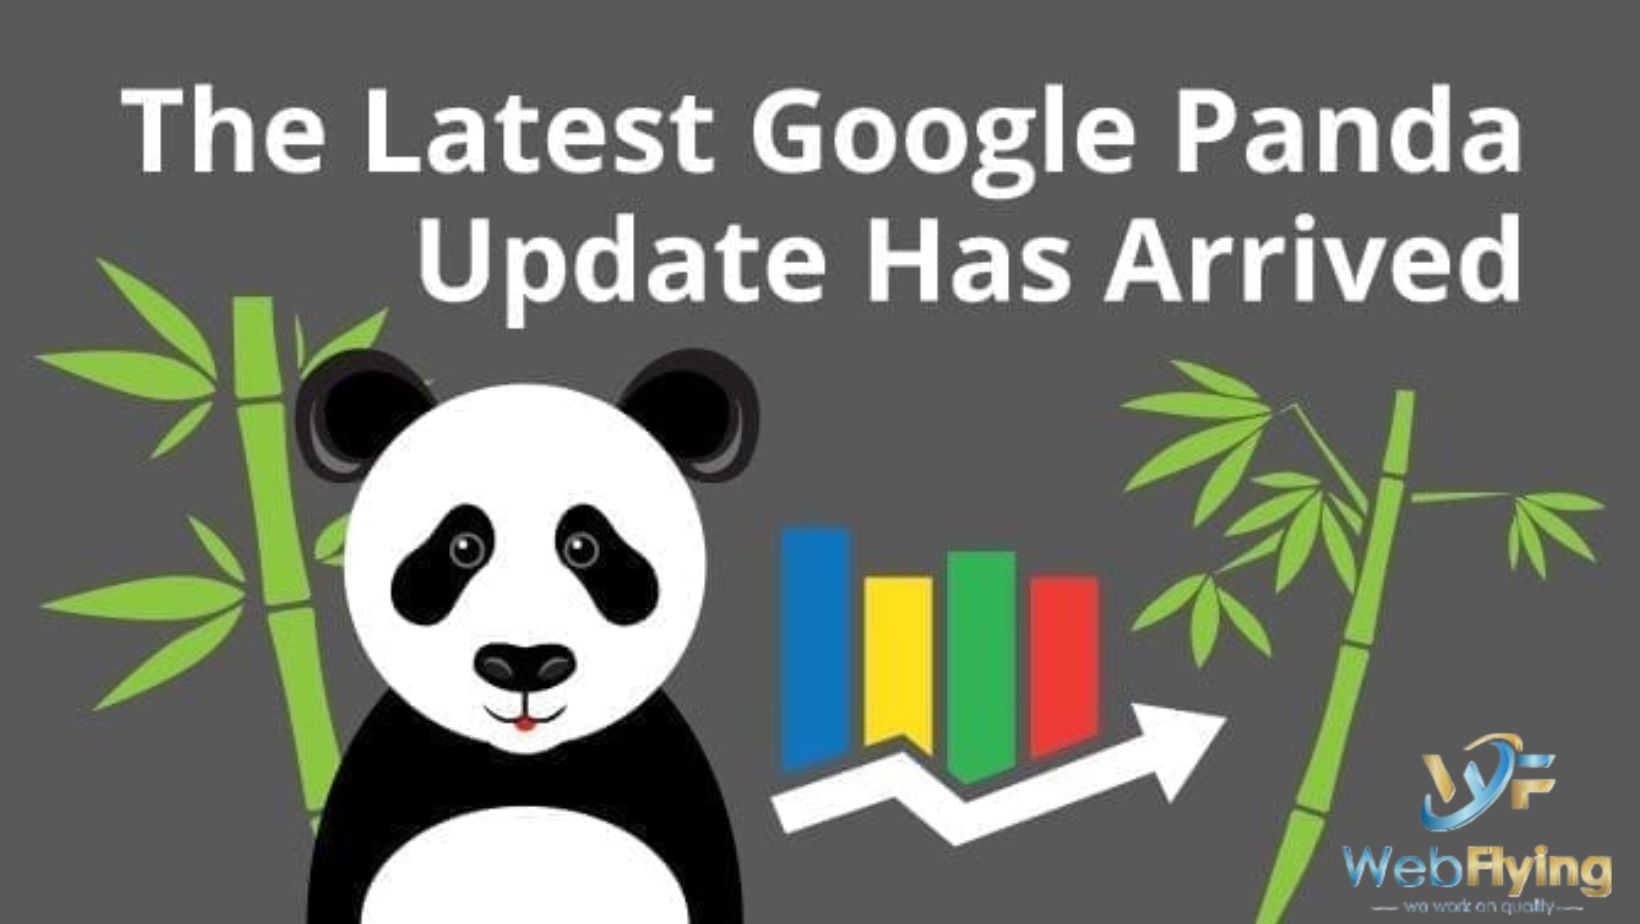 Why was Google Panda launched?